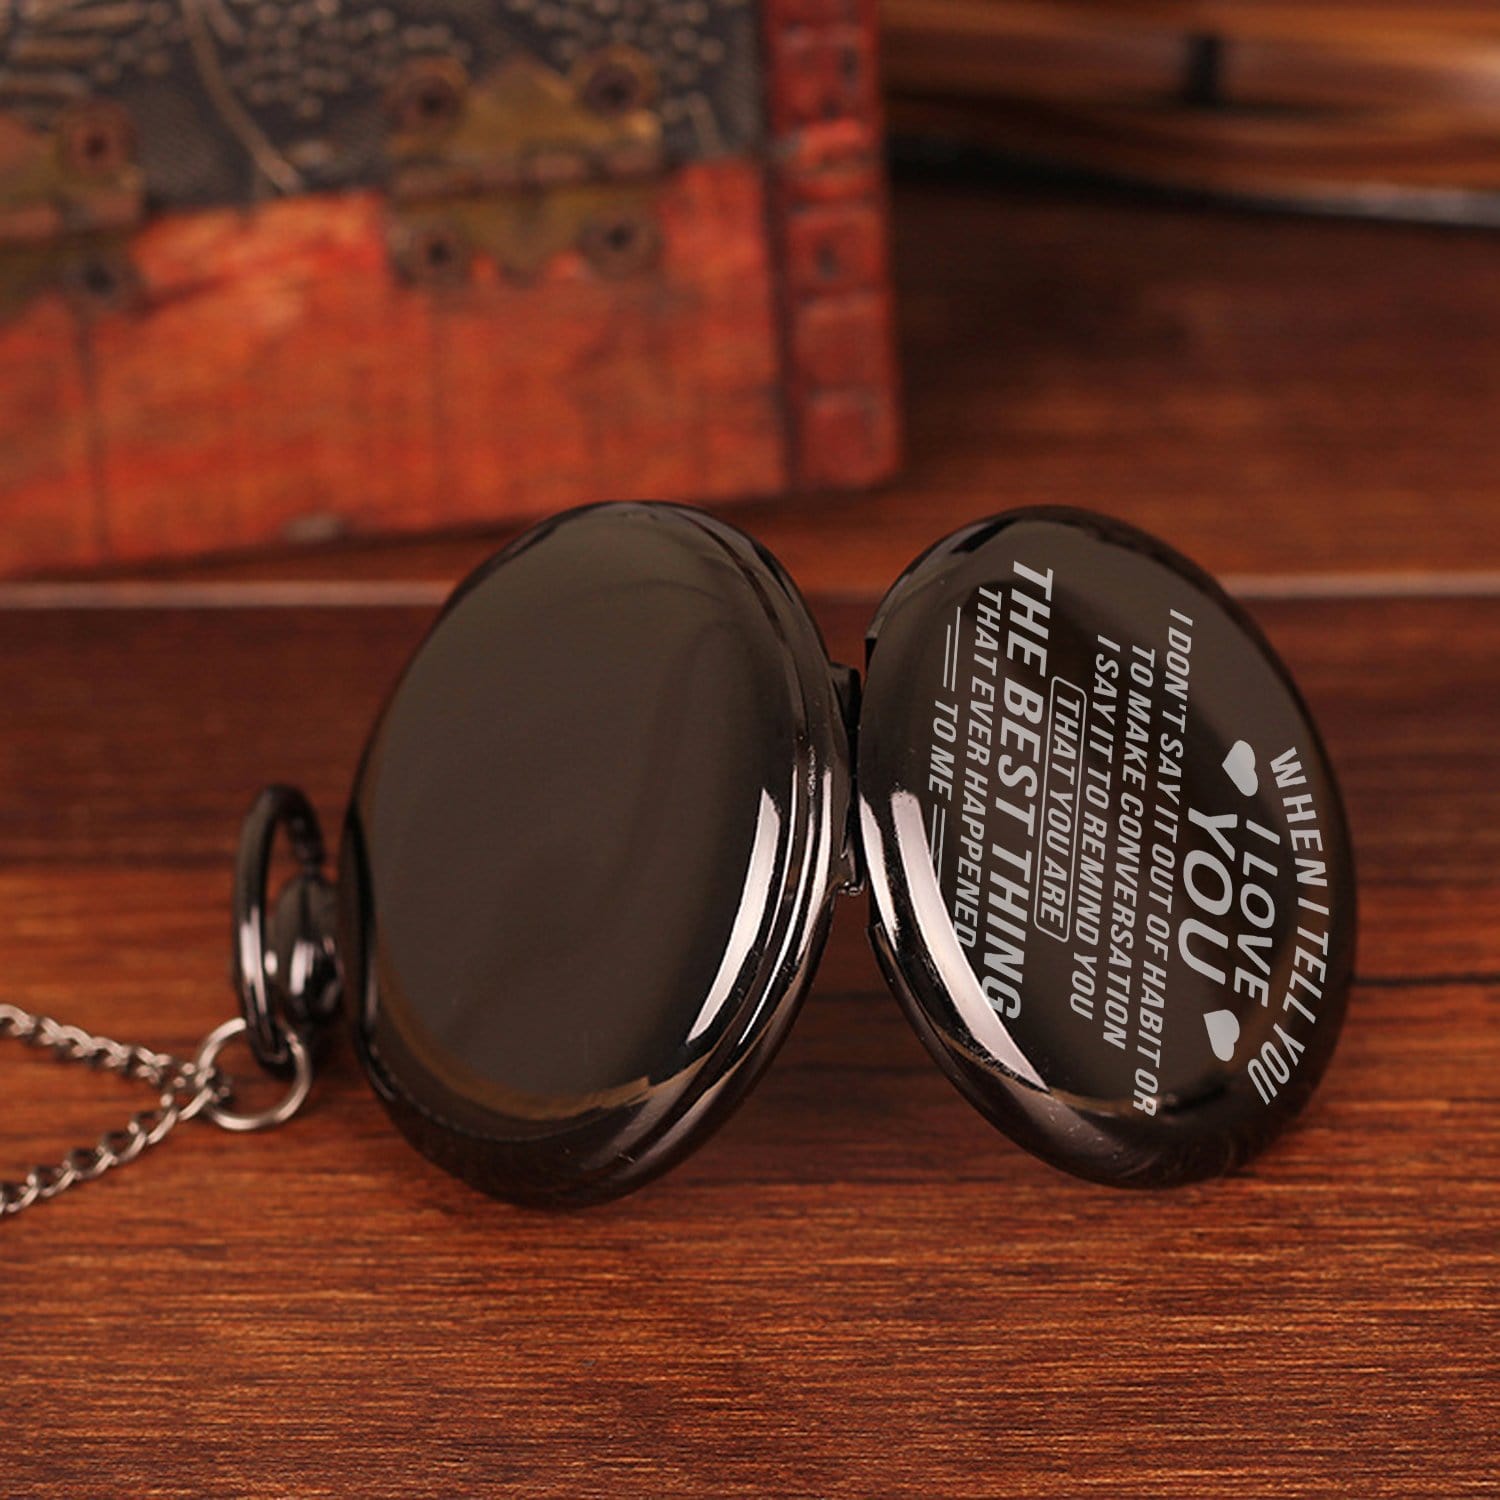 Pocket Watches When I Tell You I Love You Pocket Watch GiveMe-Gifts